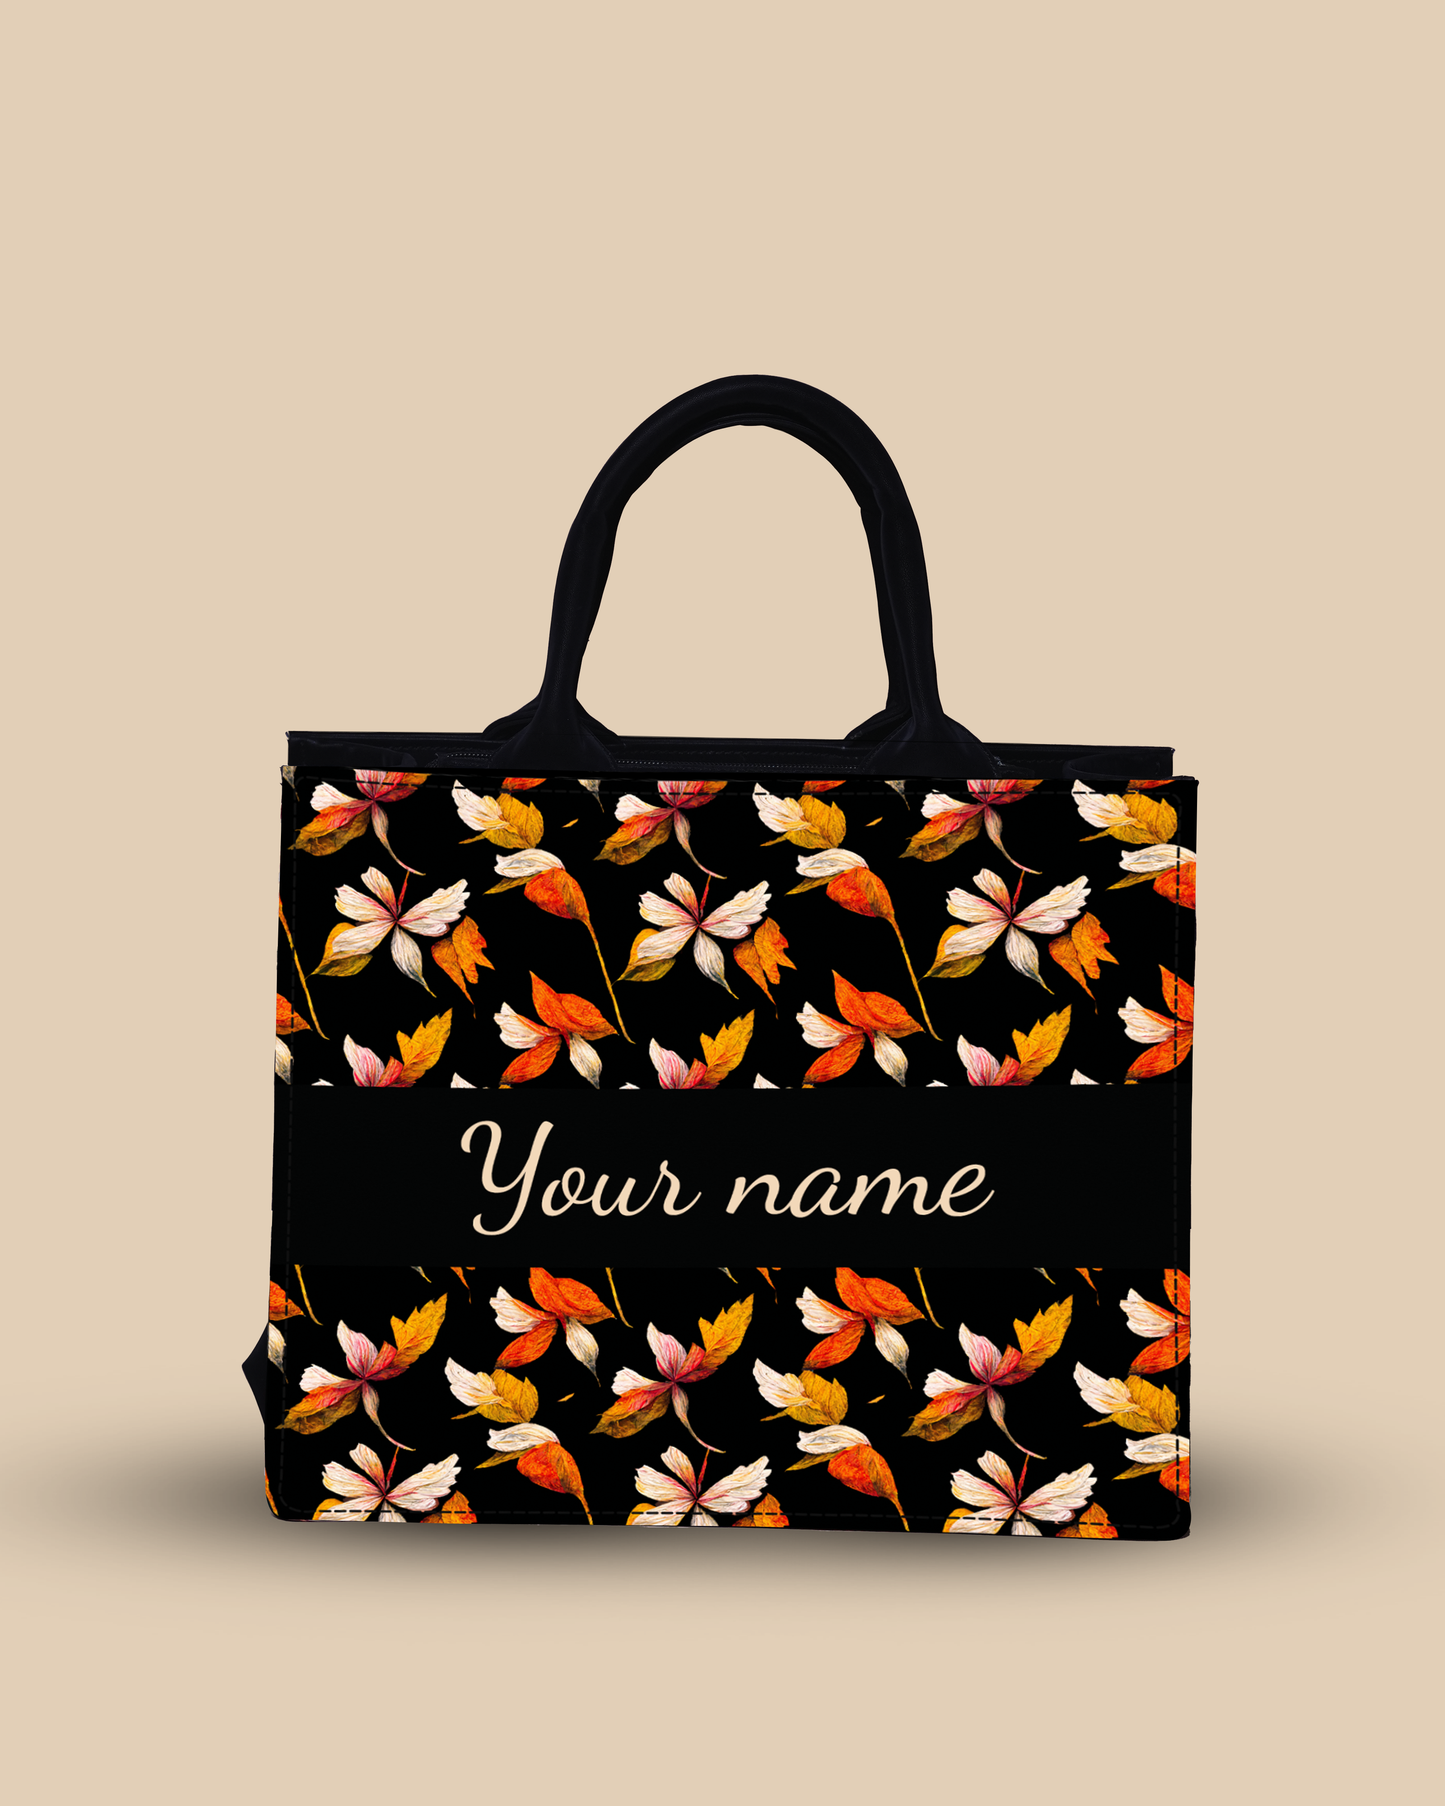 Customized small Tote Bag Designed with Watercolor Autumn Leaves Pattern